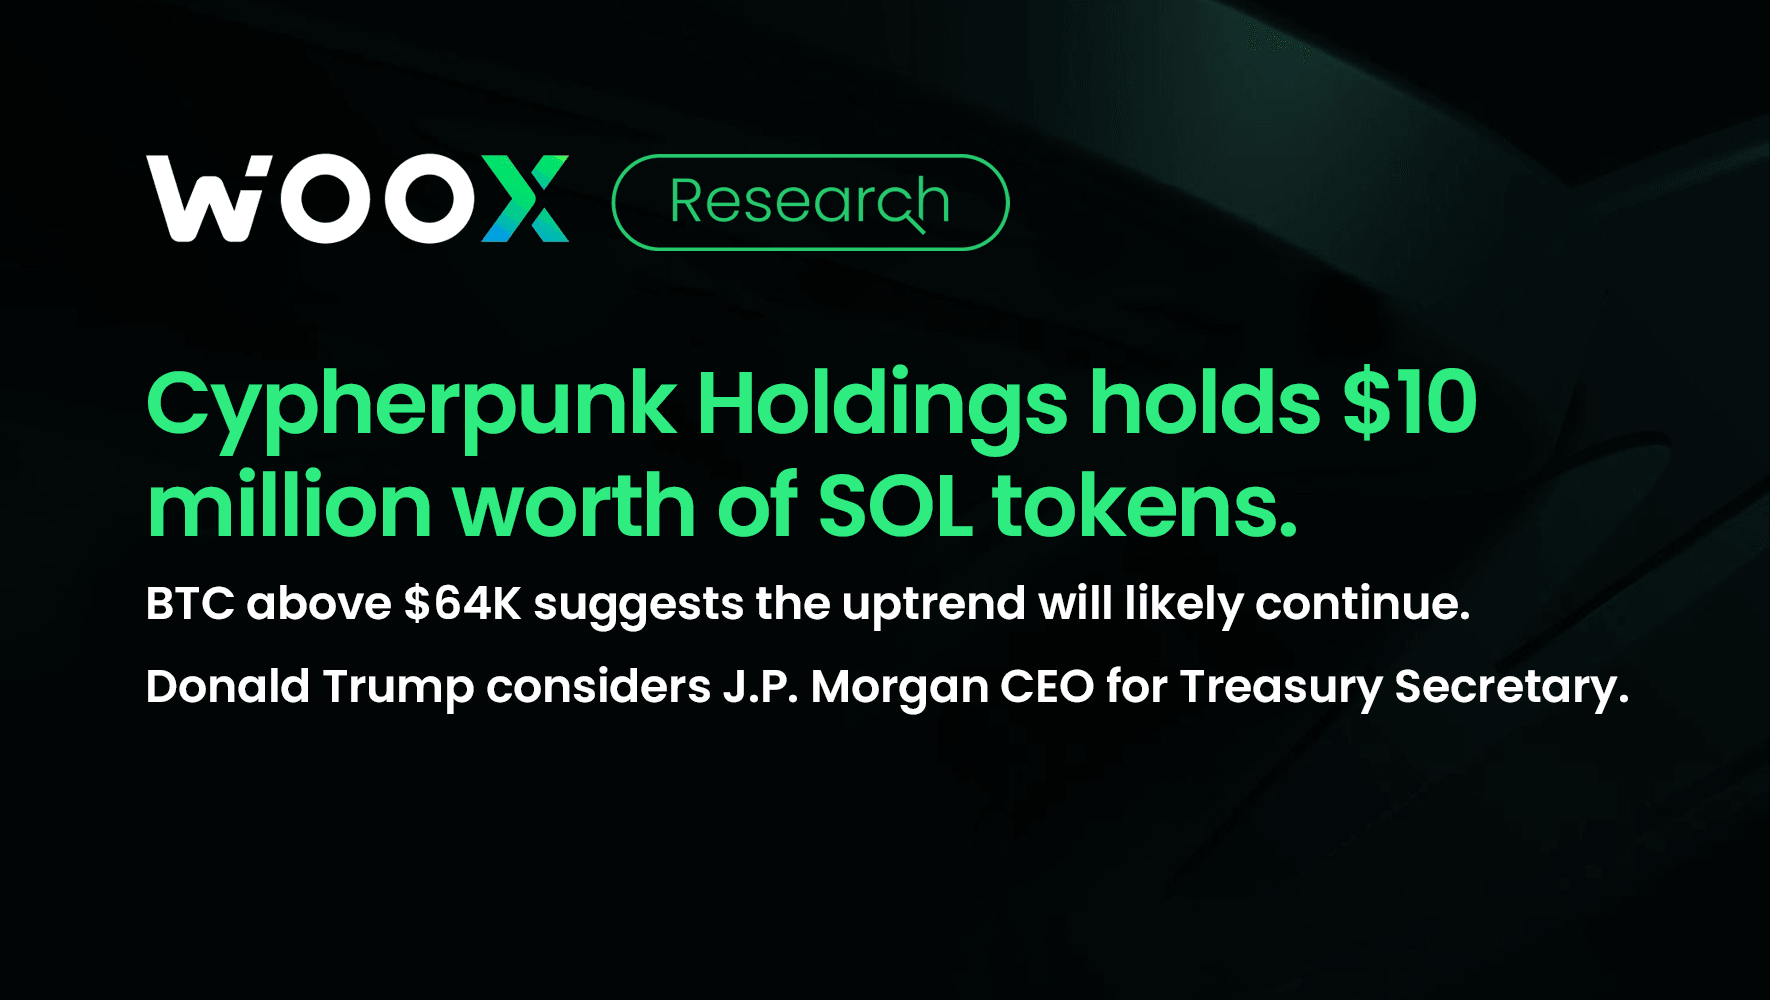 Cypherpunk Holdings holds $10 million worth of SOL tokens.